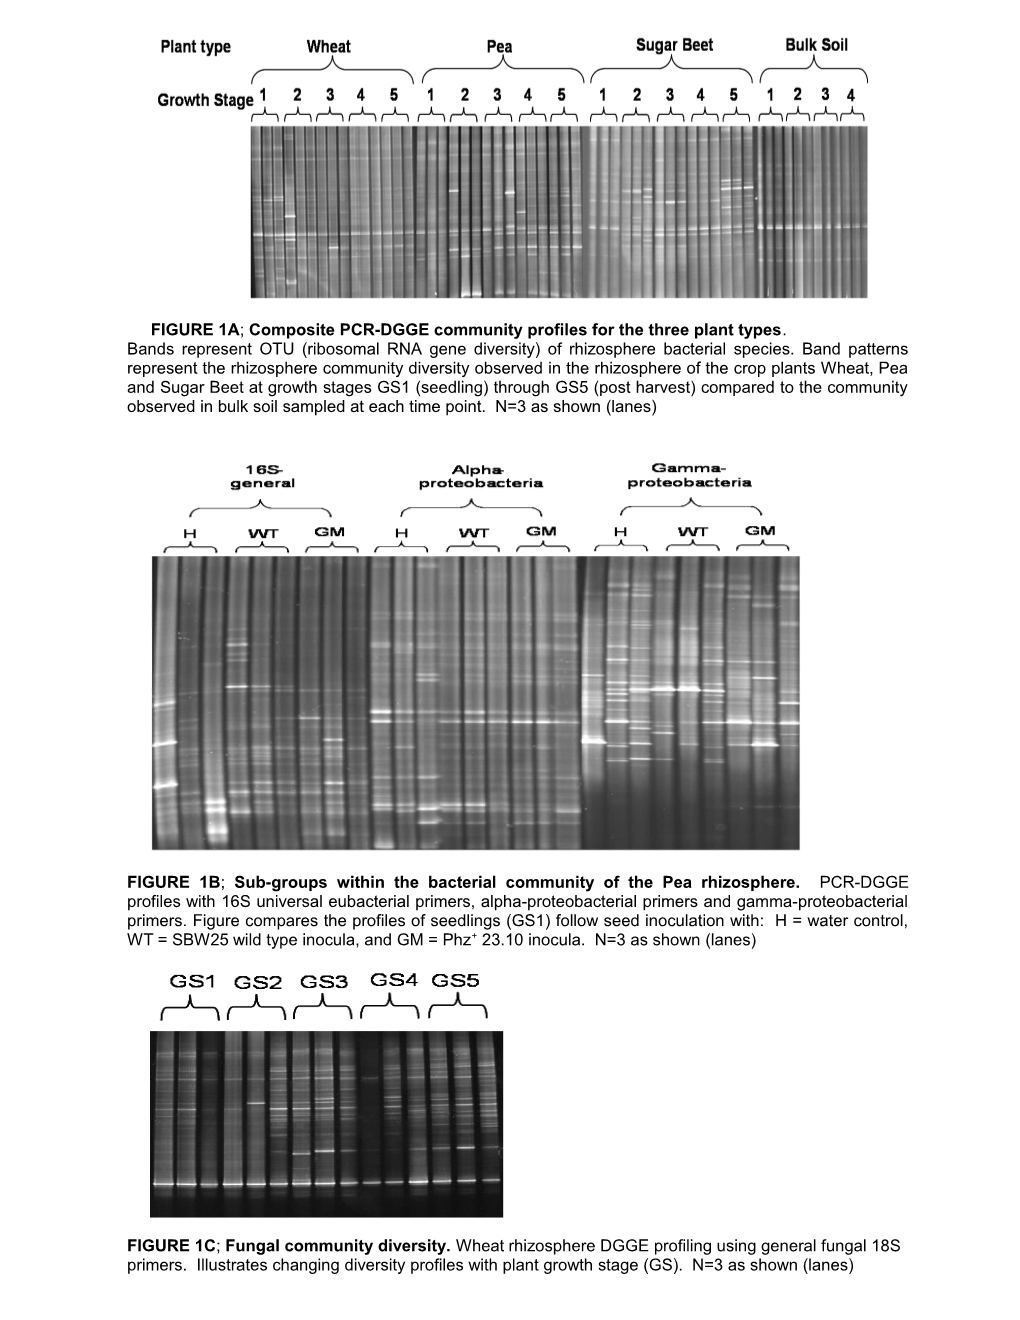 FIGURE 1A; Composite PCR-DGGE Community Profiles for the Three Plant Types